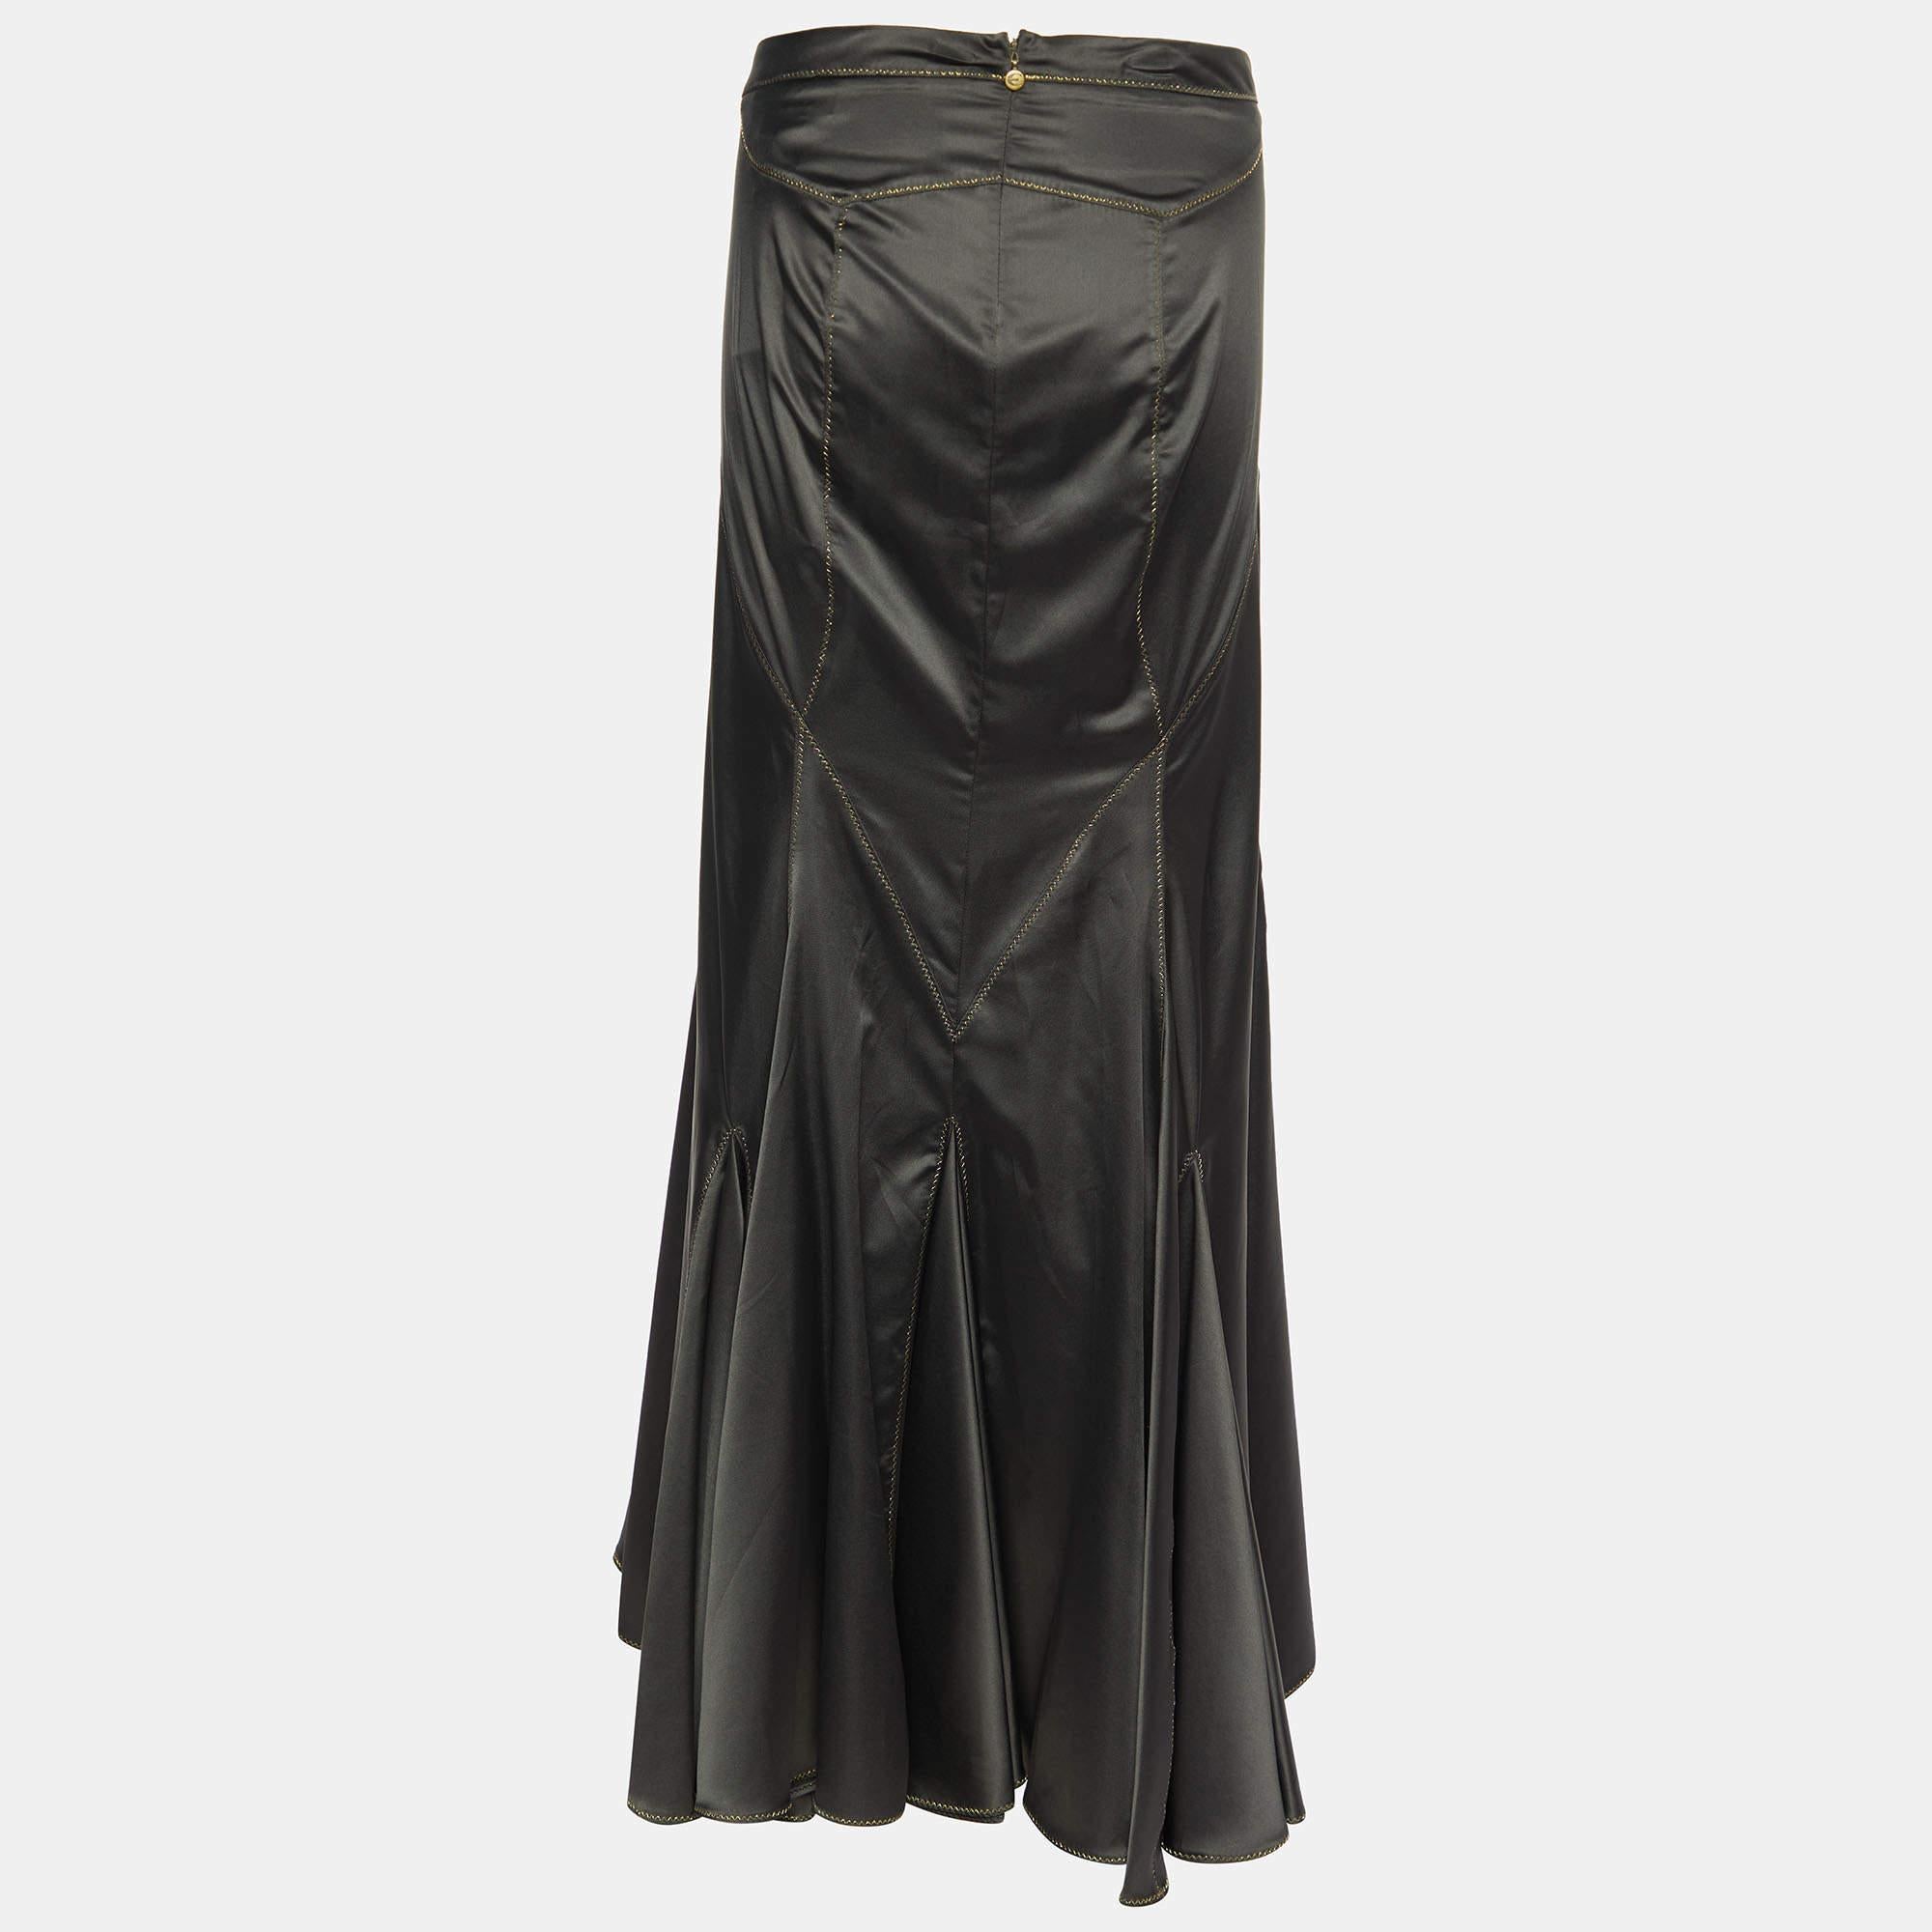 This elegant skirt is worth adding to your closet! Crafted from fine materials, it is exquisitely designed into a flattering shape.

Includes:  Brand tag